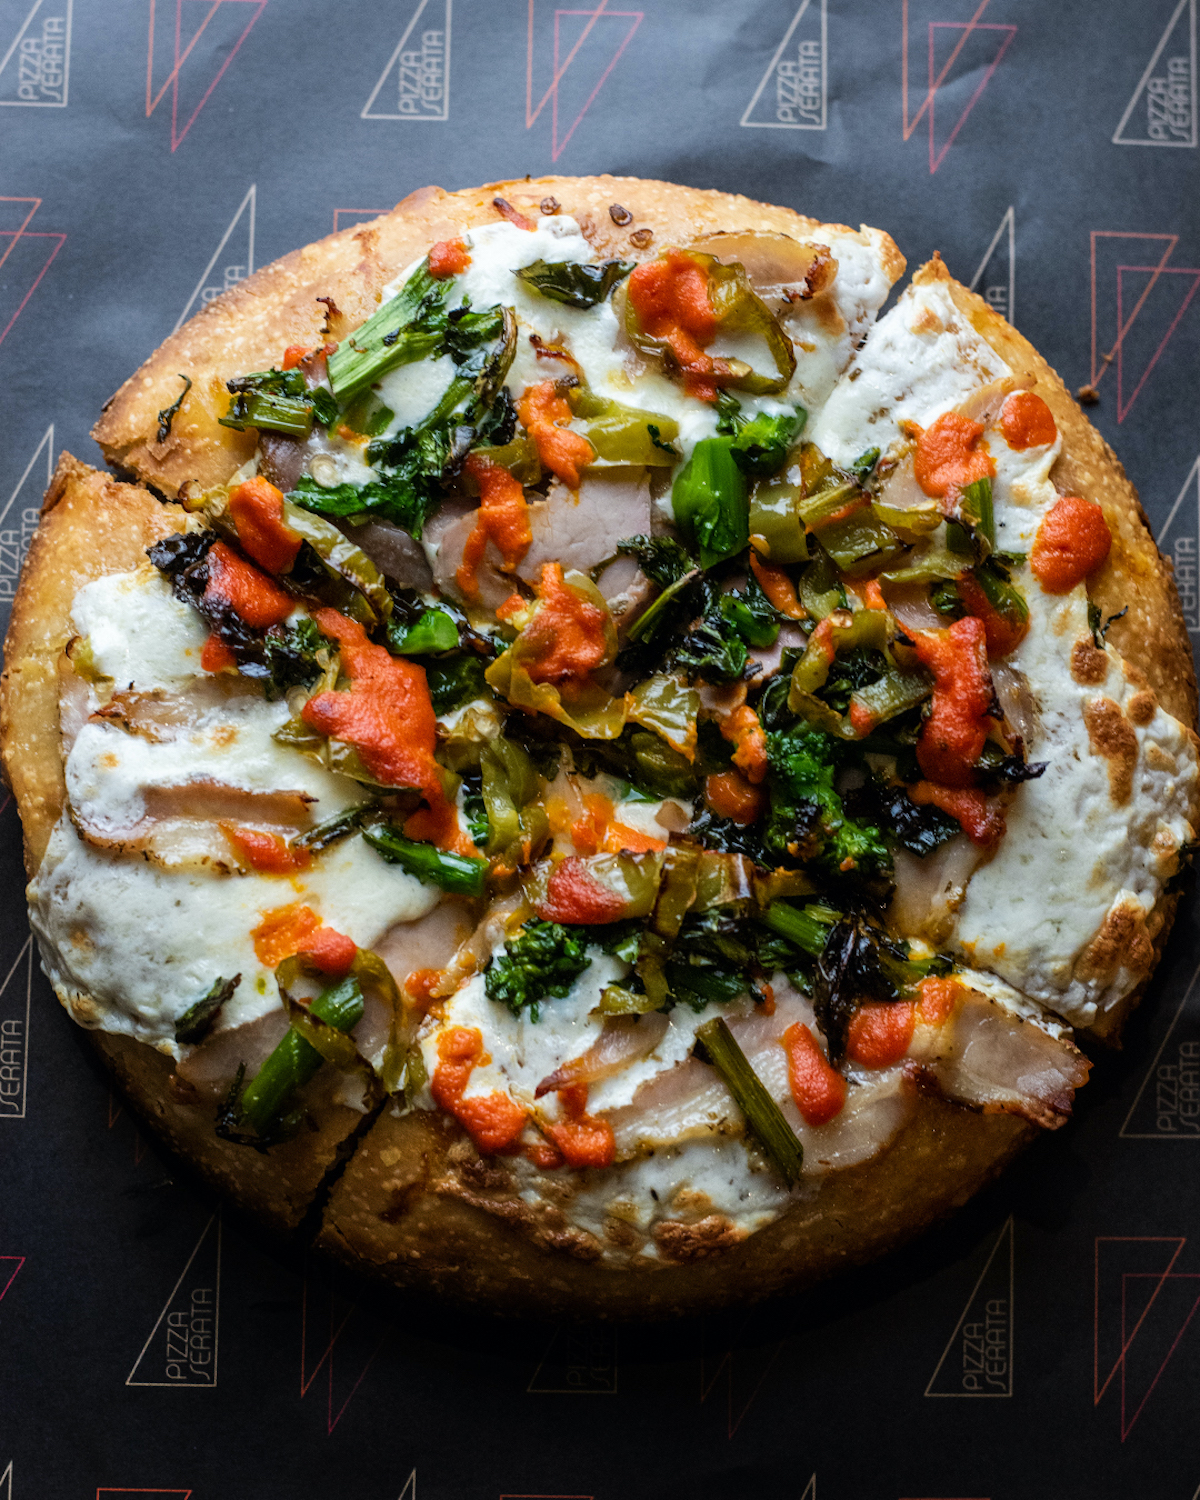 The Philly pork-inspired Reading Terminal pizza with homemade porchetta, broccoli rabe, and long hots.